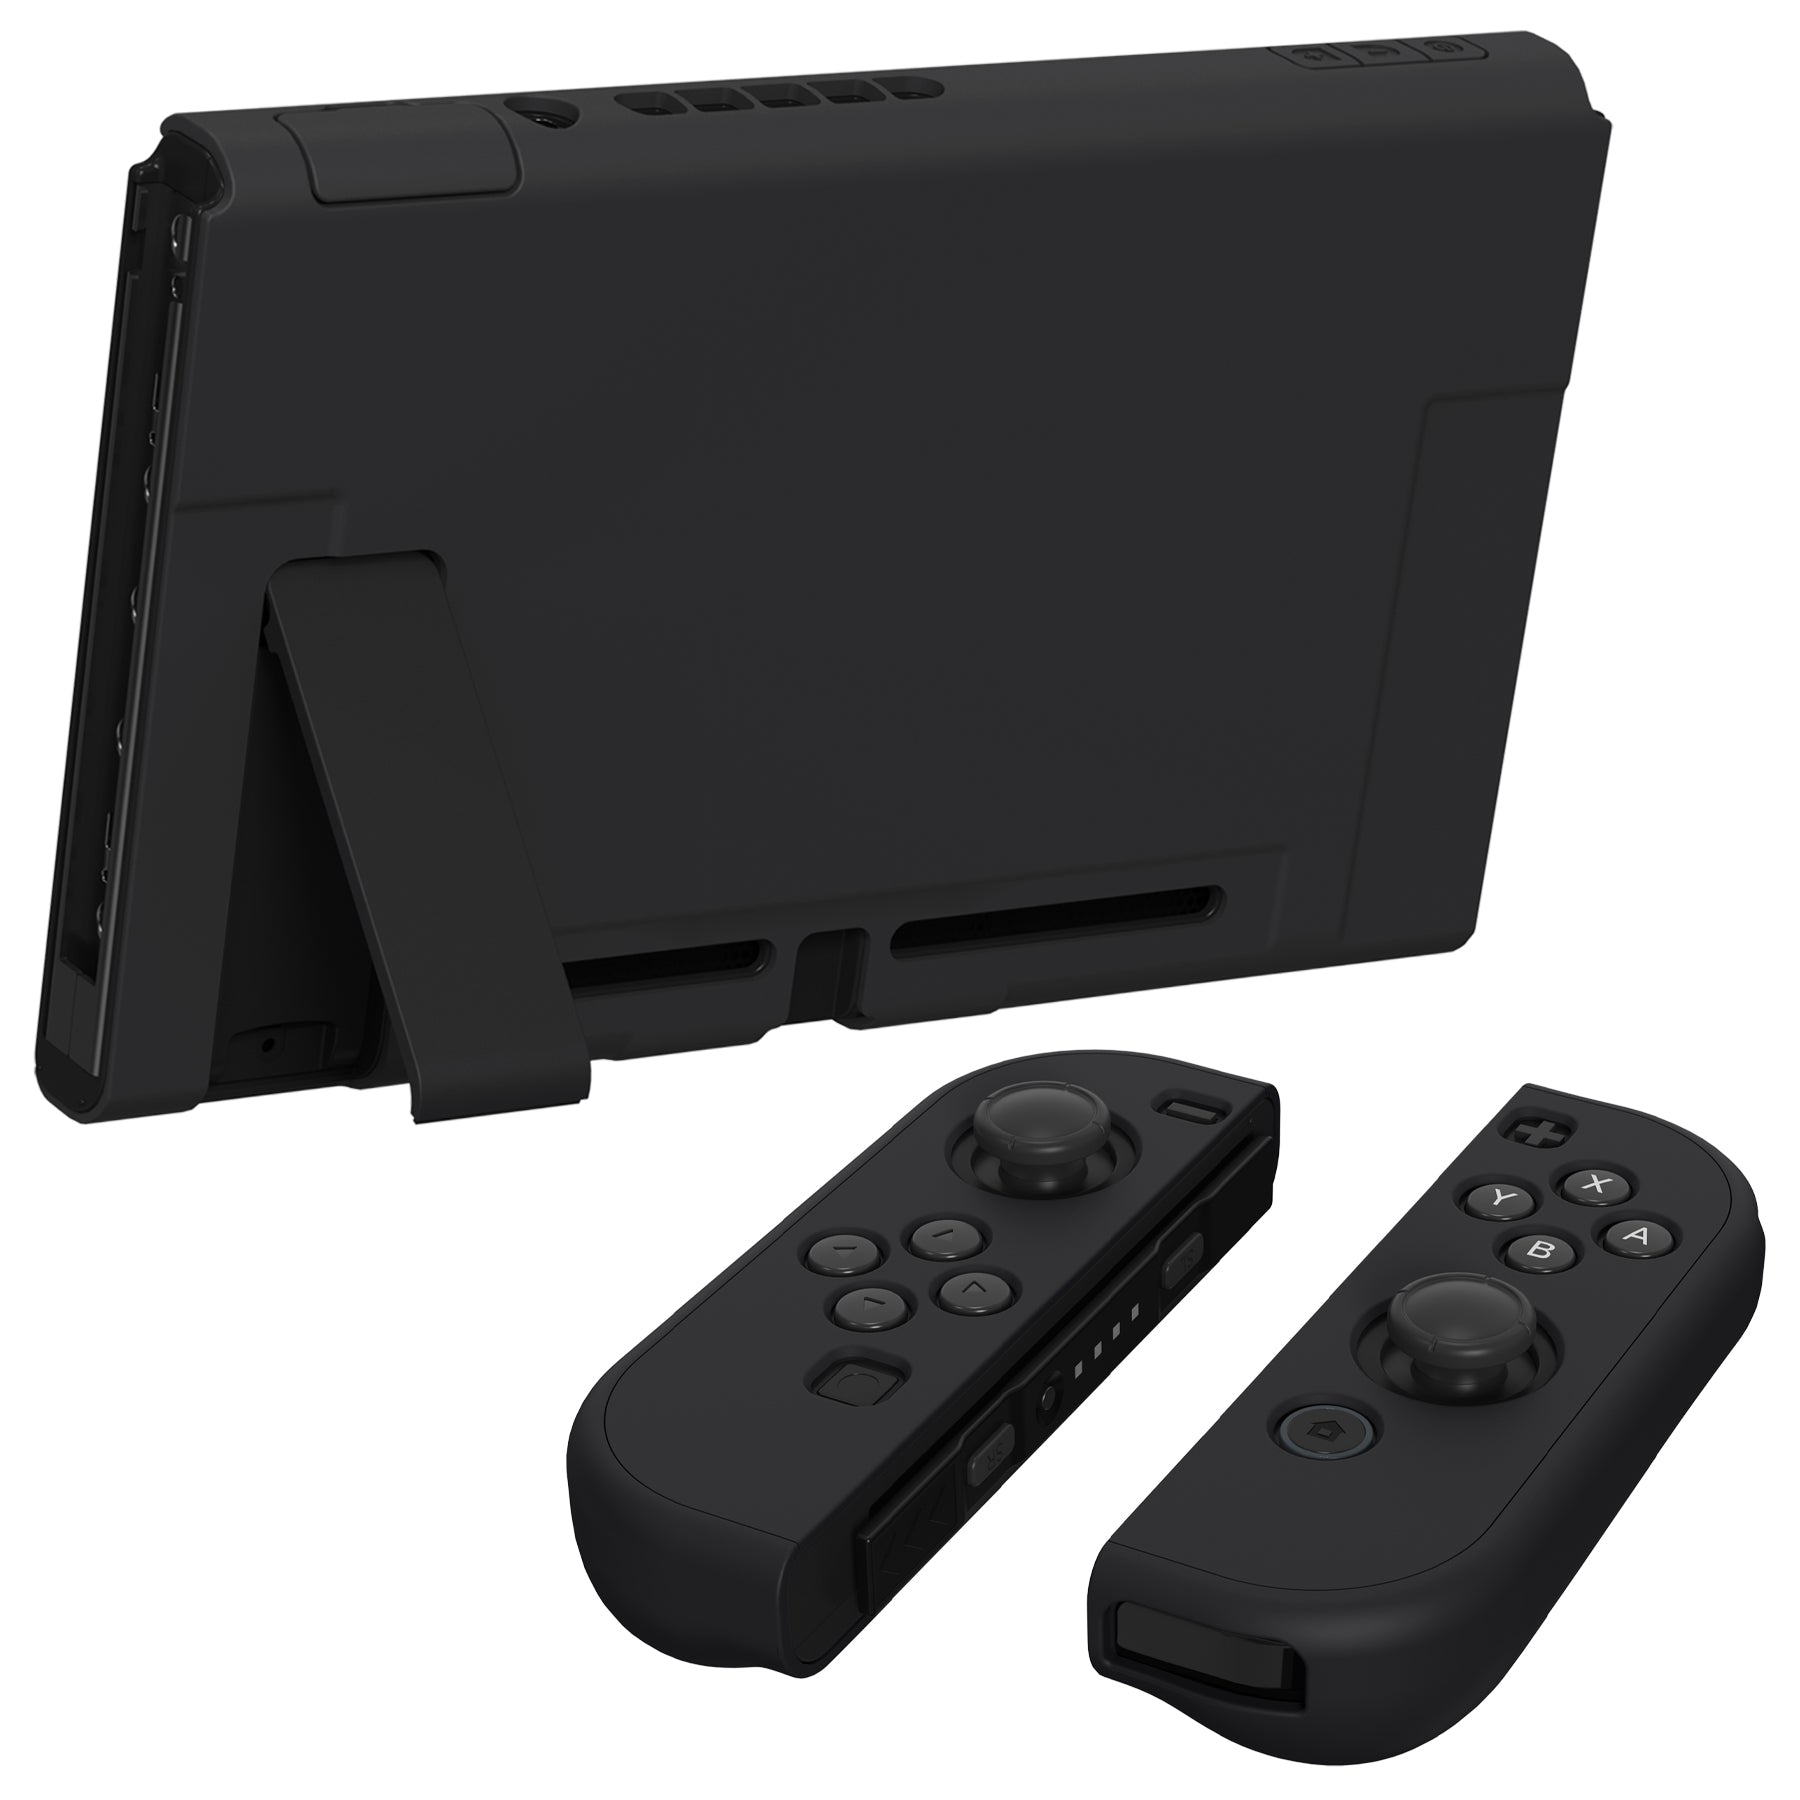 PlayVital UPGRADED Dockable Case Grip Cover for NS Switch, Ergonomic Protective Case for NS Switch, Separable Protector Hard Shell for Joycon - Black - ANSP3006 PlayVital